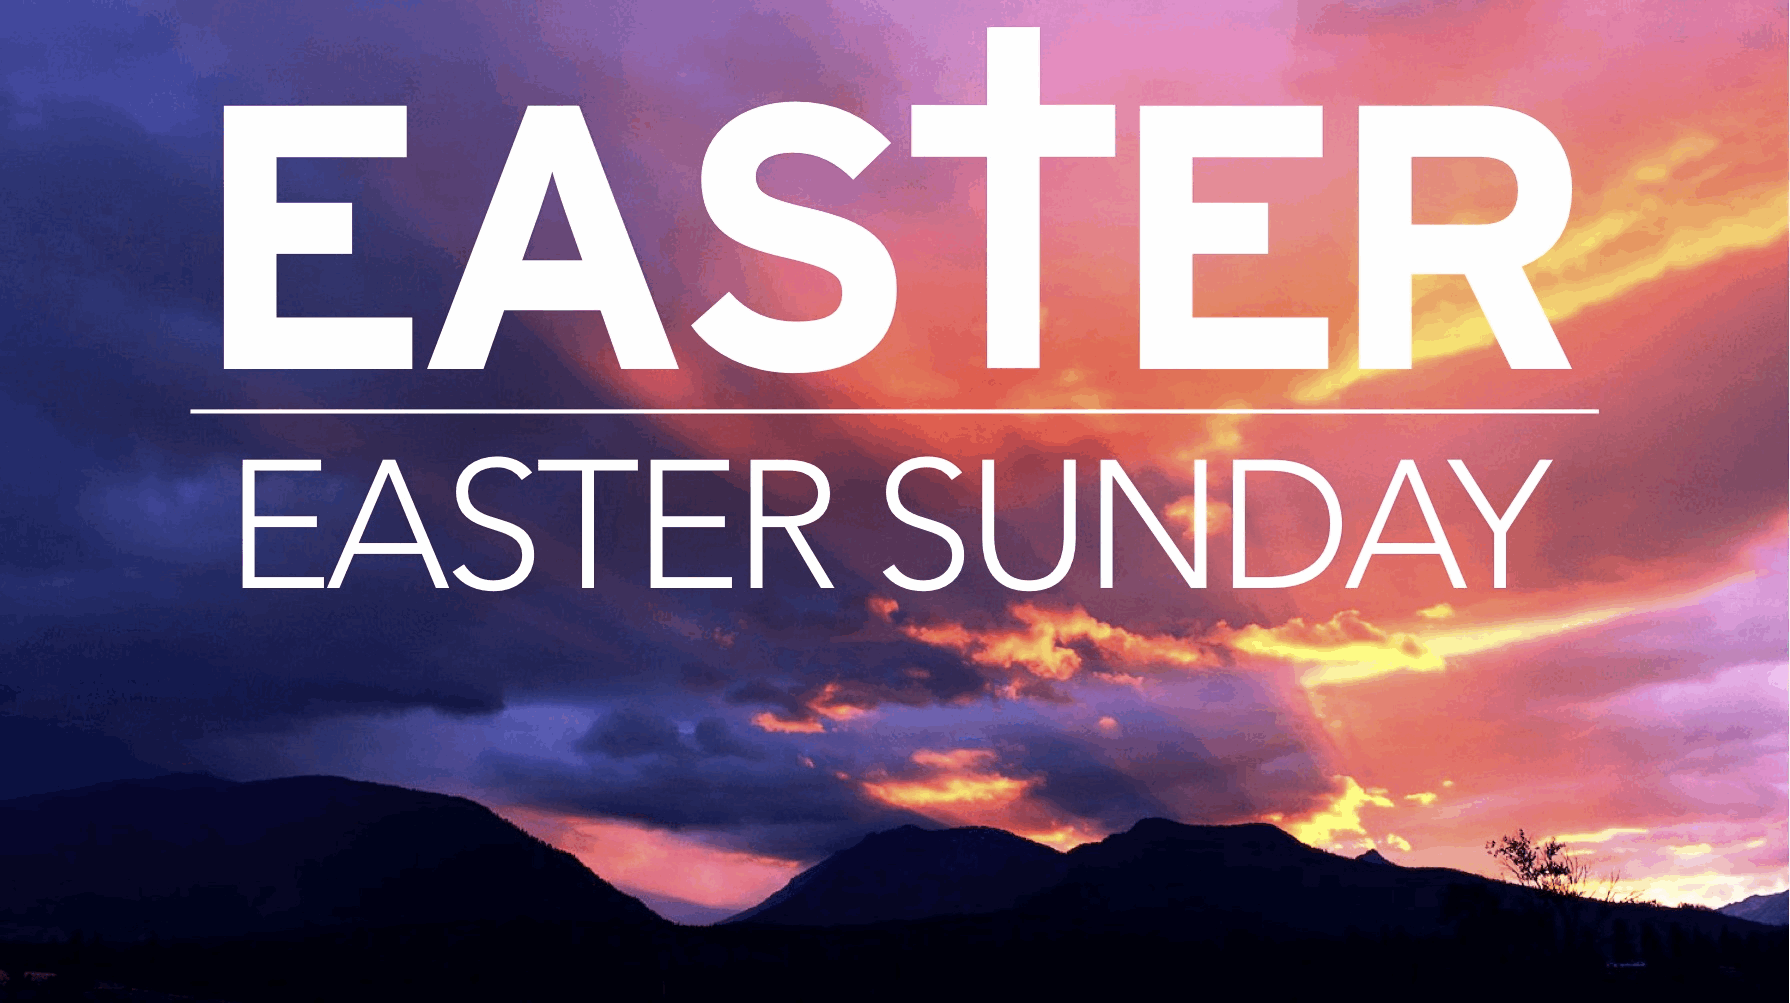 Best Easter Sunday Wish Pictures And Image